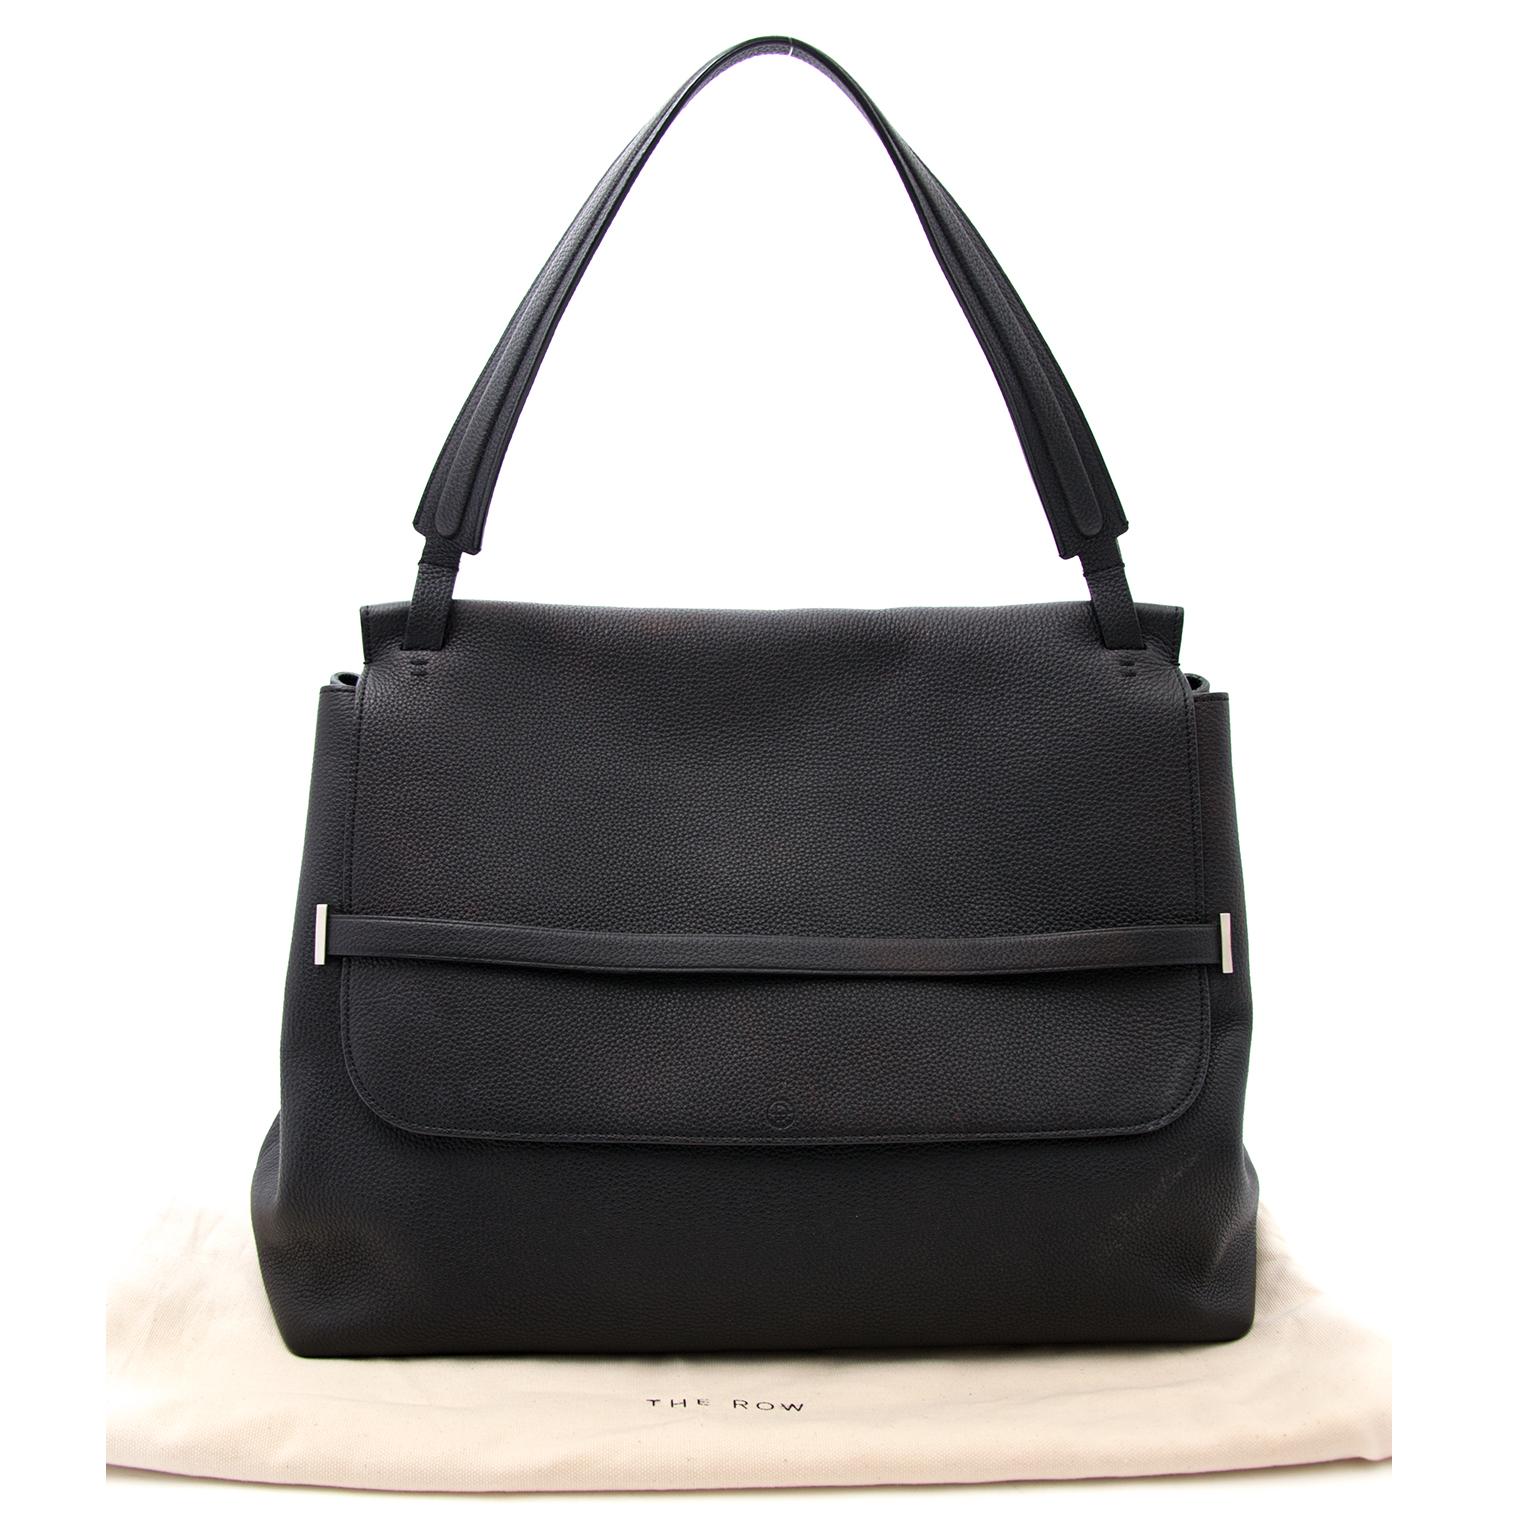 Excellent preloved condition

Estimated retail price: €2300

The Row Black Leather Tote

The Row's tote bag is a luxe staple that promises to prove an envy-inducing mainstay for many seasons to come. 
The beautiful leather features a roomy interior